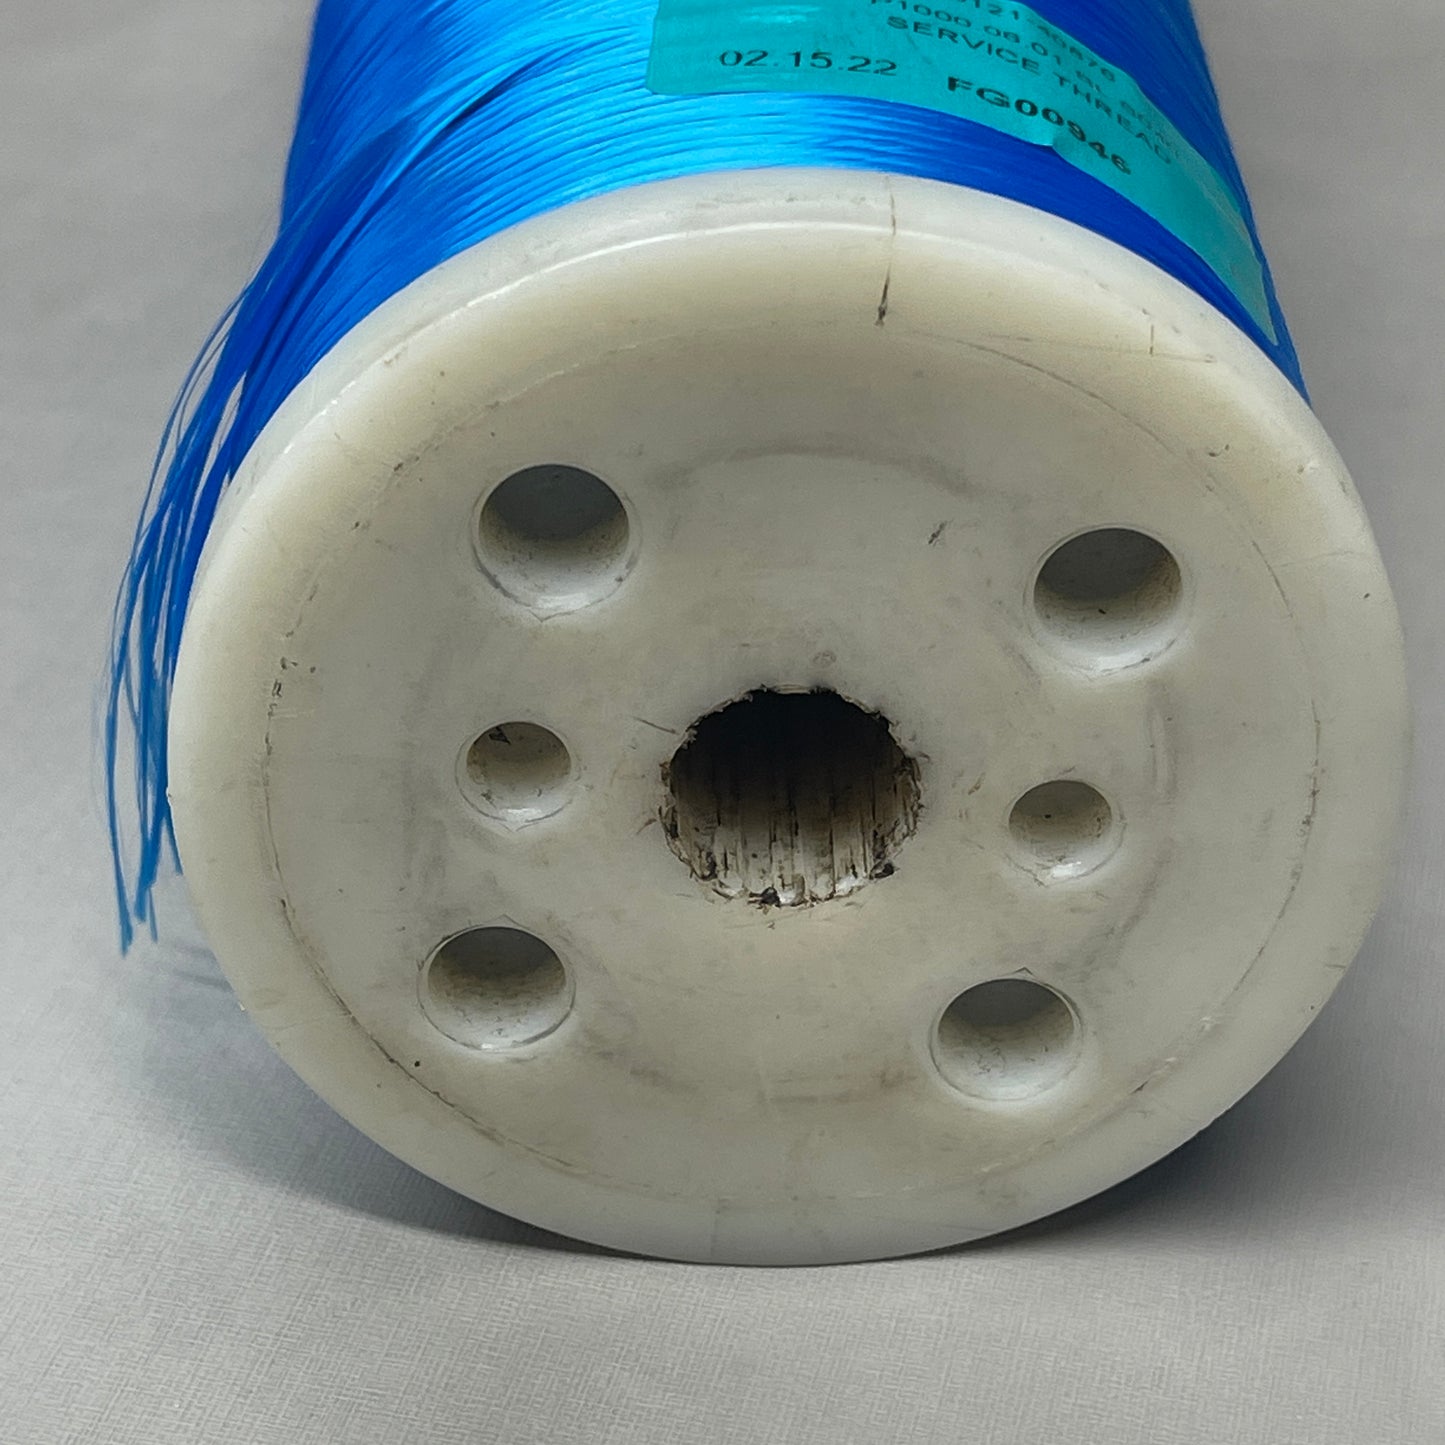 SERVICE THREAD 12/5 Blue Poly Thread for Ind. Sewing Machines & Systems P1000